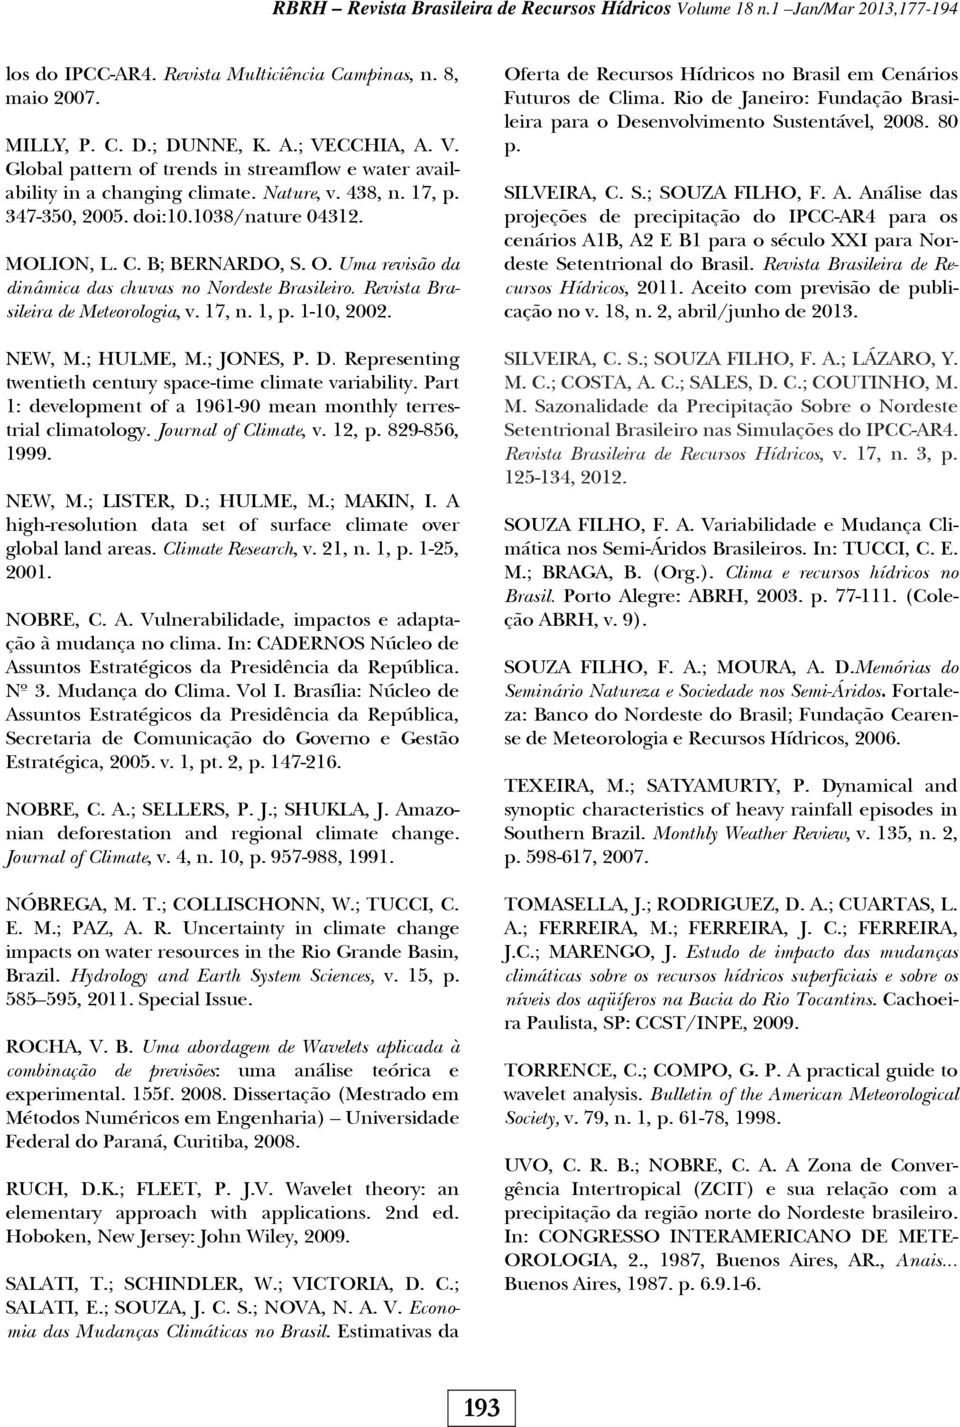 17, n. 1, p. 1-10, 2002. NEW, M.; HULME, M.; JONES, P. D. Representing twentieth century space-time climate variability. Part 1: development of a 1961-90 mean monthly terrestrial climatology.